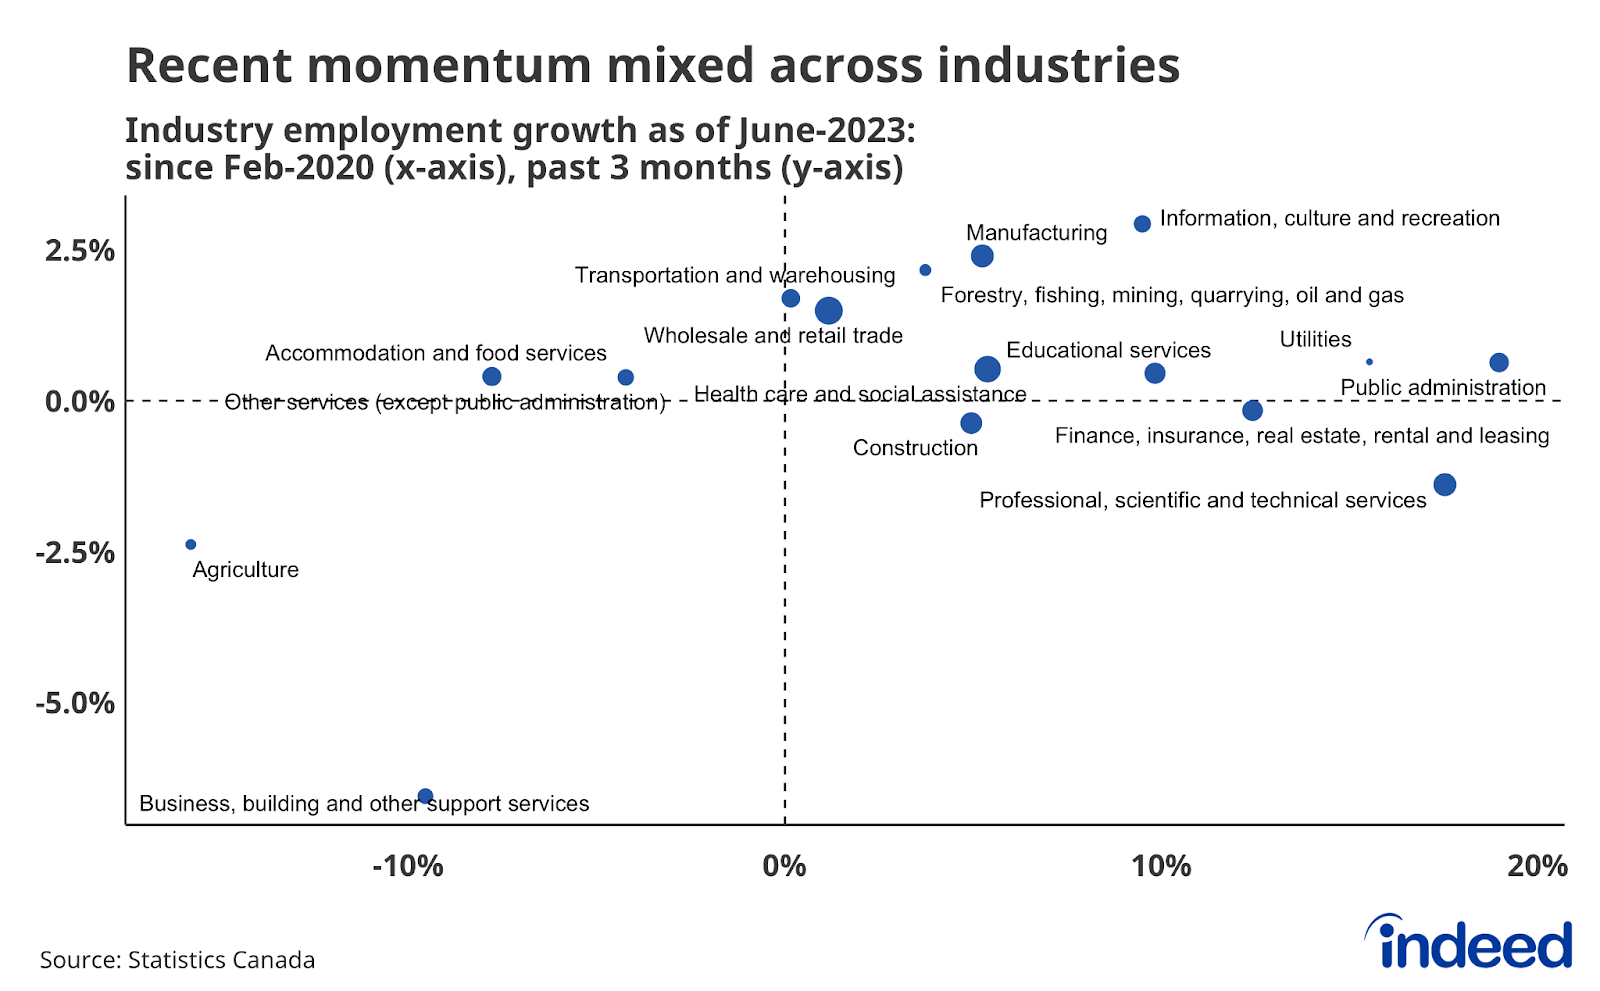 A scatter plot chart titled “Recent momentum mixed across industries,” with each data point representing how employment in different industries stood in June 2023 compared to their pre-pandemic level on the x-axis, and three months earlier on the y-axis. Business and building support services and professional and technical services were relatively weak over the prior three months, while information and culture, and manufacturing were stronger. 